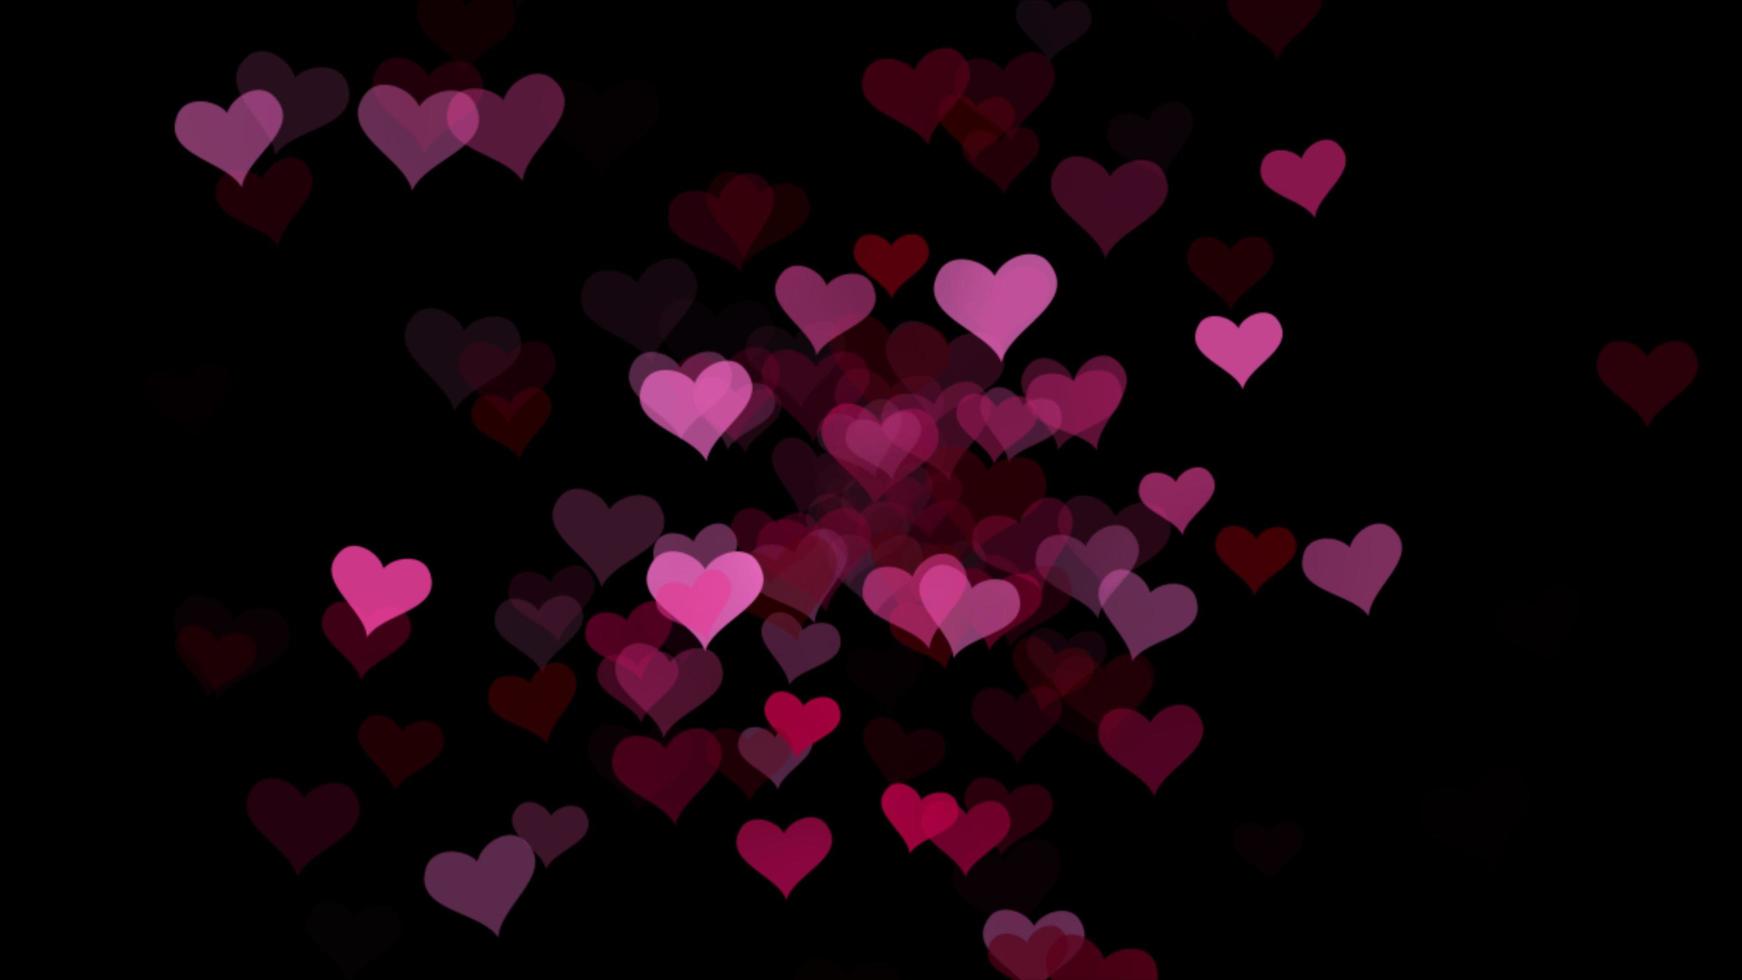 Pink hearts decoration background - computer illustration graphic for Valentine's day concept photo